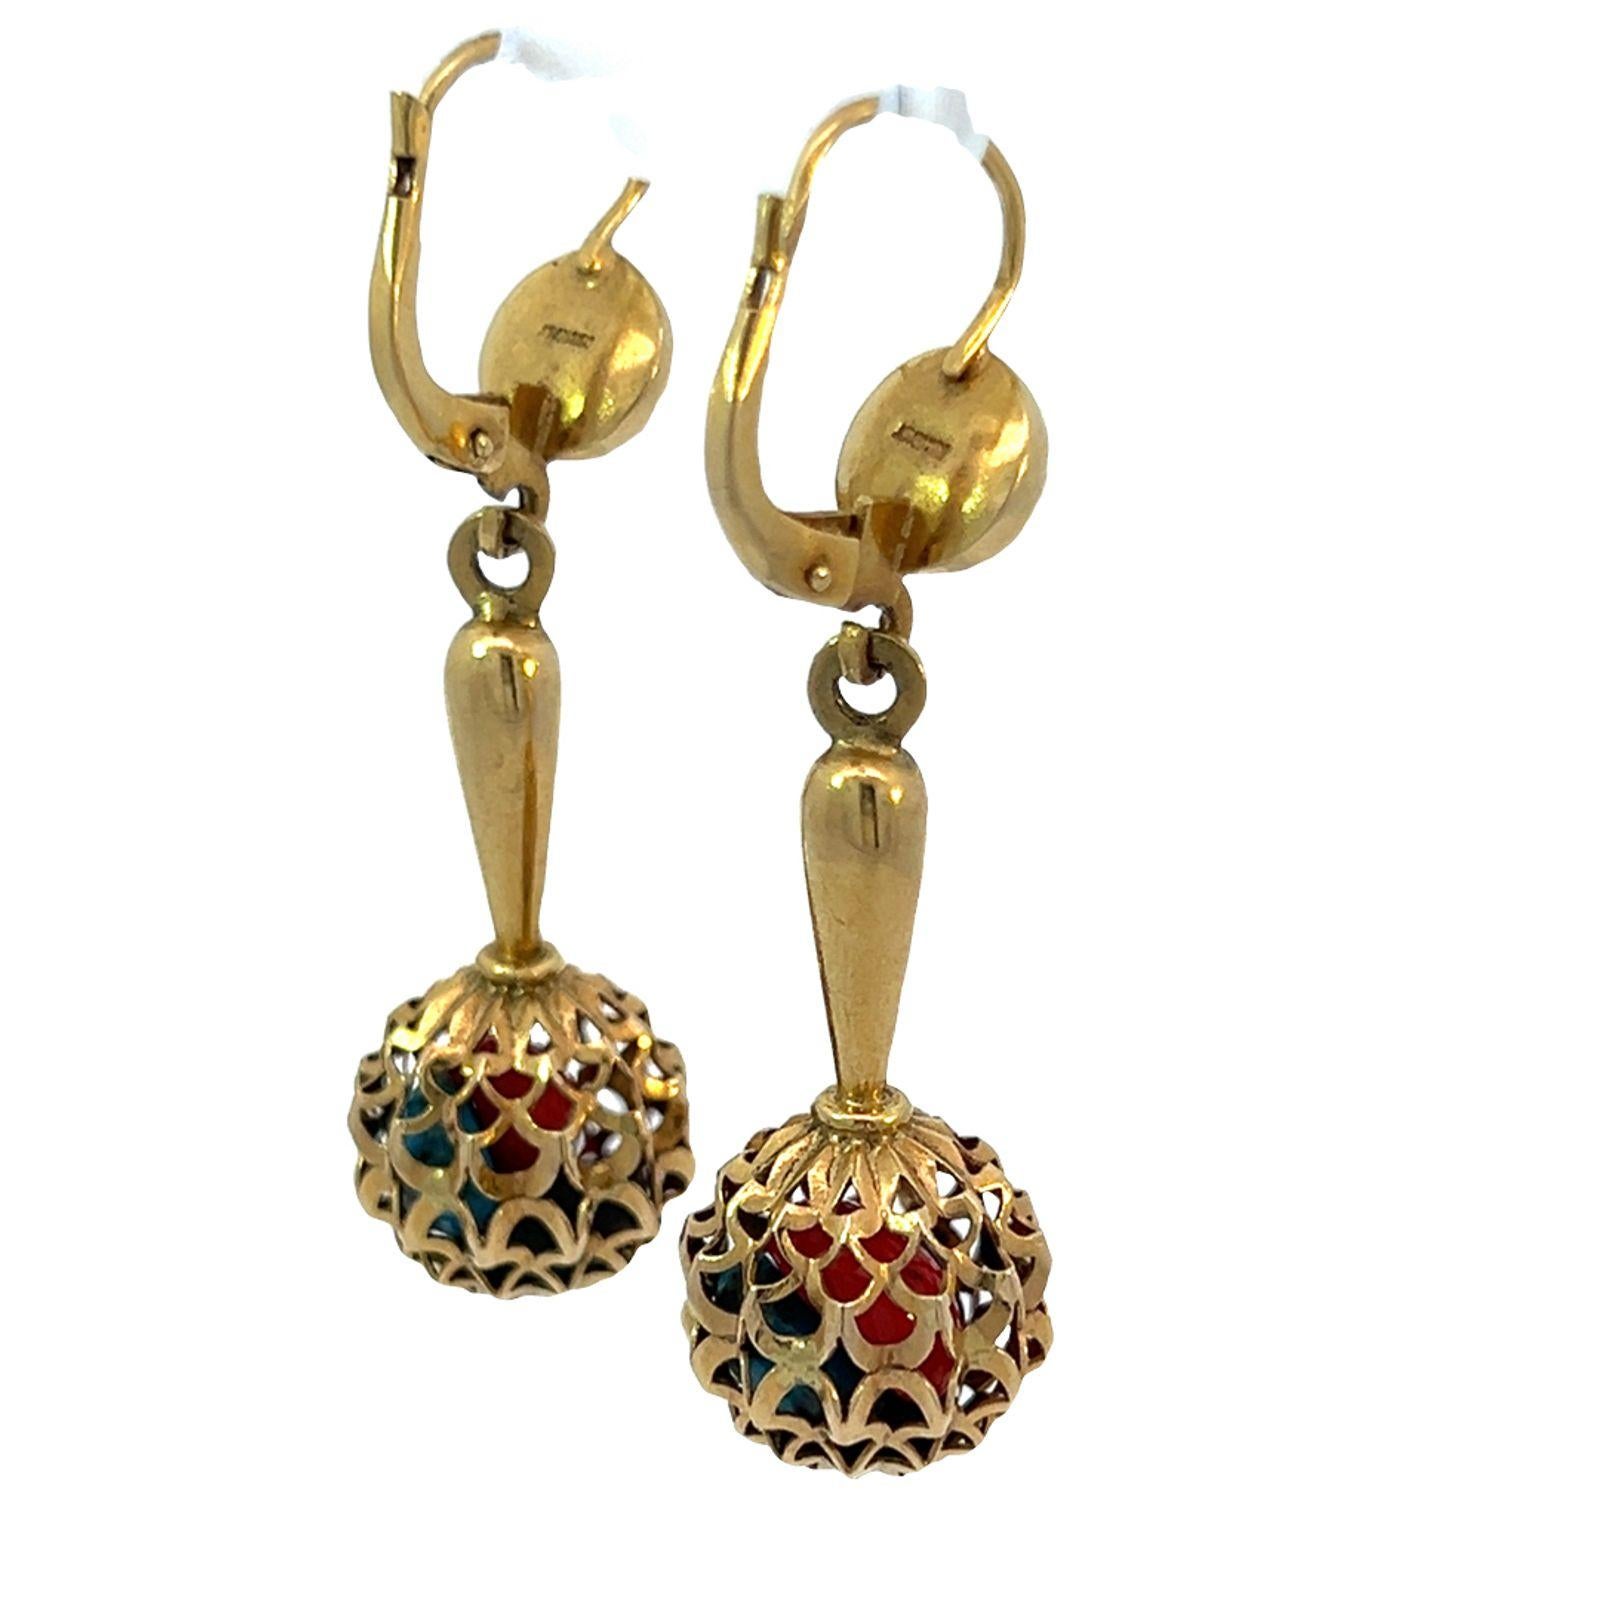 Vintage 18k yellow gold Italy retro drop dangle earrings with multi-colored stones inside. The earring design is similar to maracas. The maracas have colored stones inside them giving them that maraca shake. Inside the decorative gold fillagree